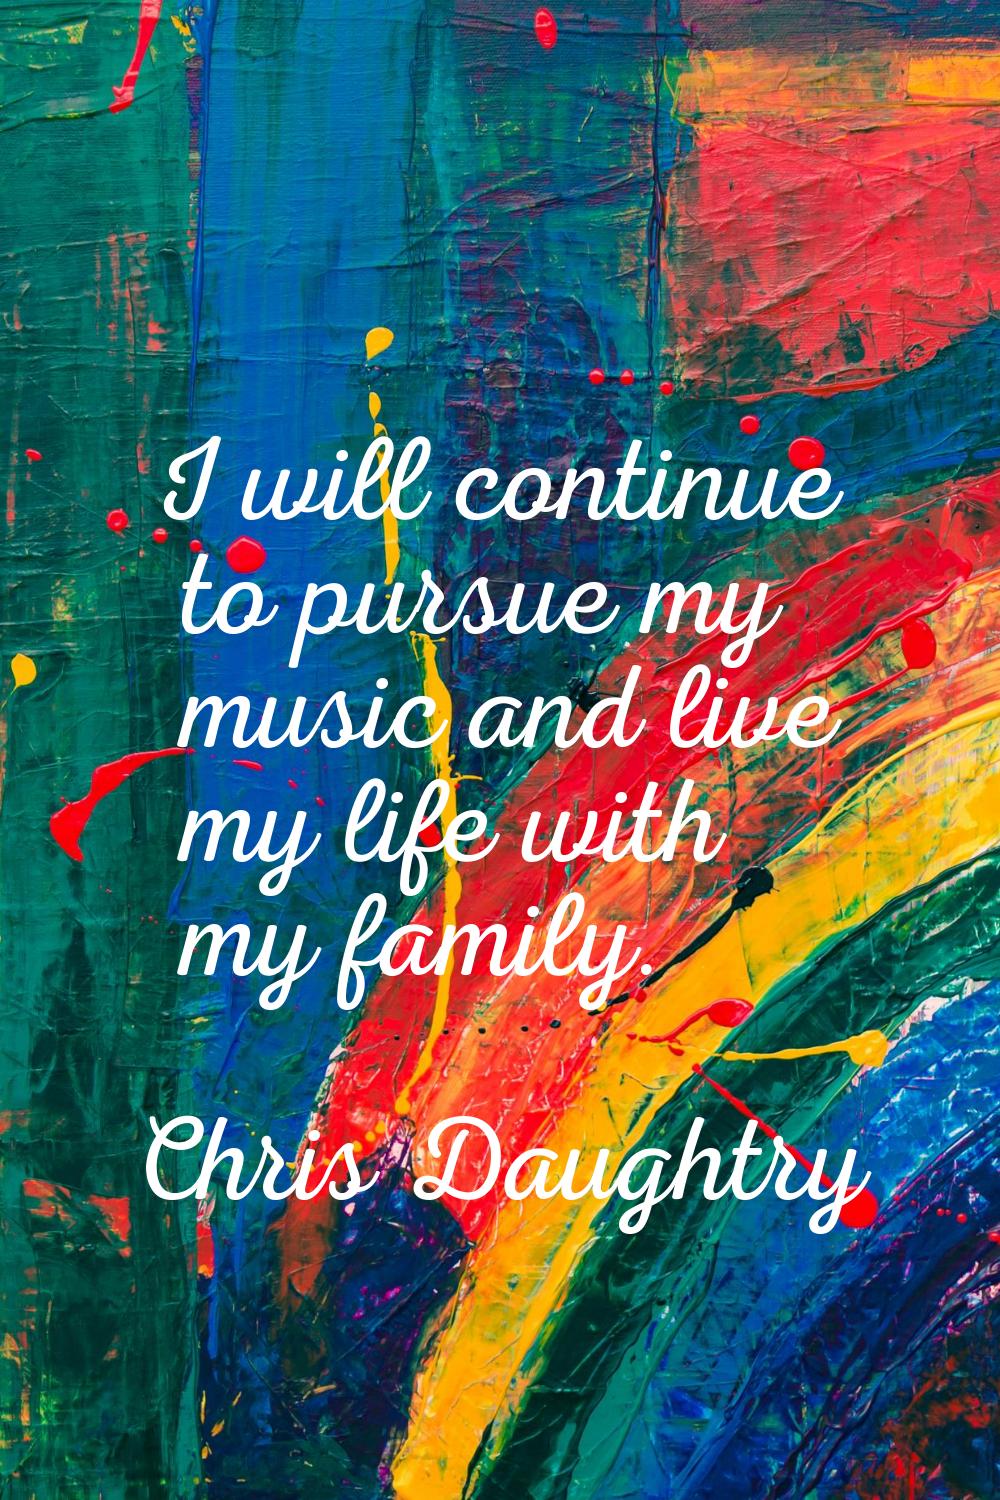 I will continue to pursue my music and live my life with my family.